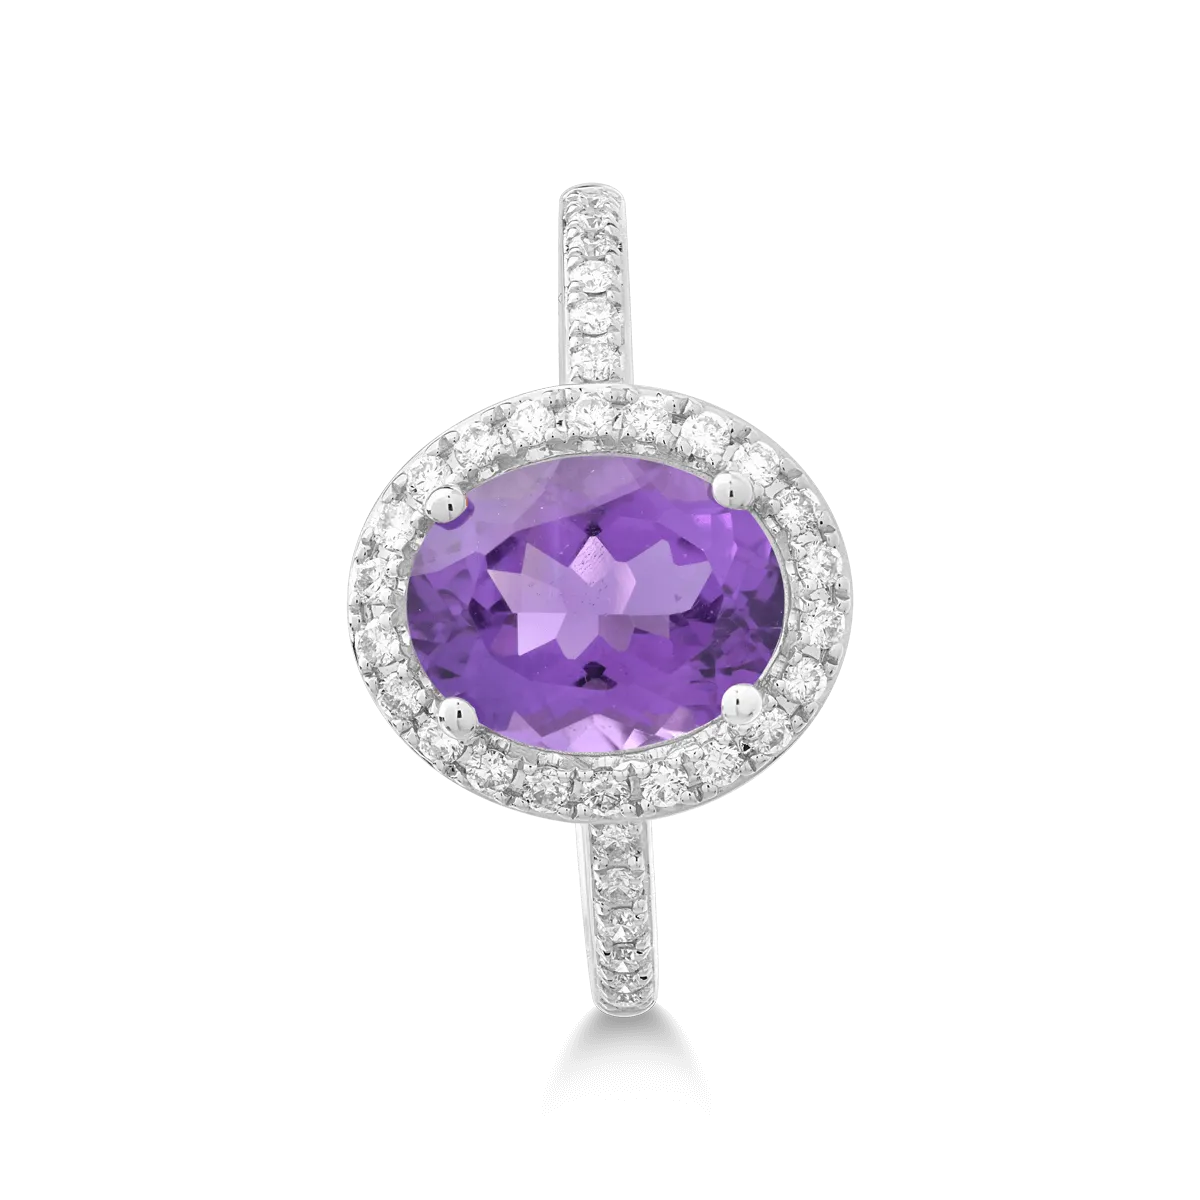 18K white gold ring with 1.98ct amethyst and 0.24ct diamonds